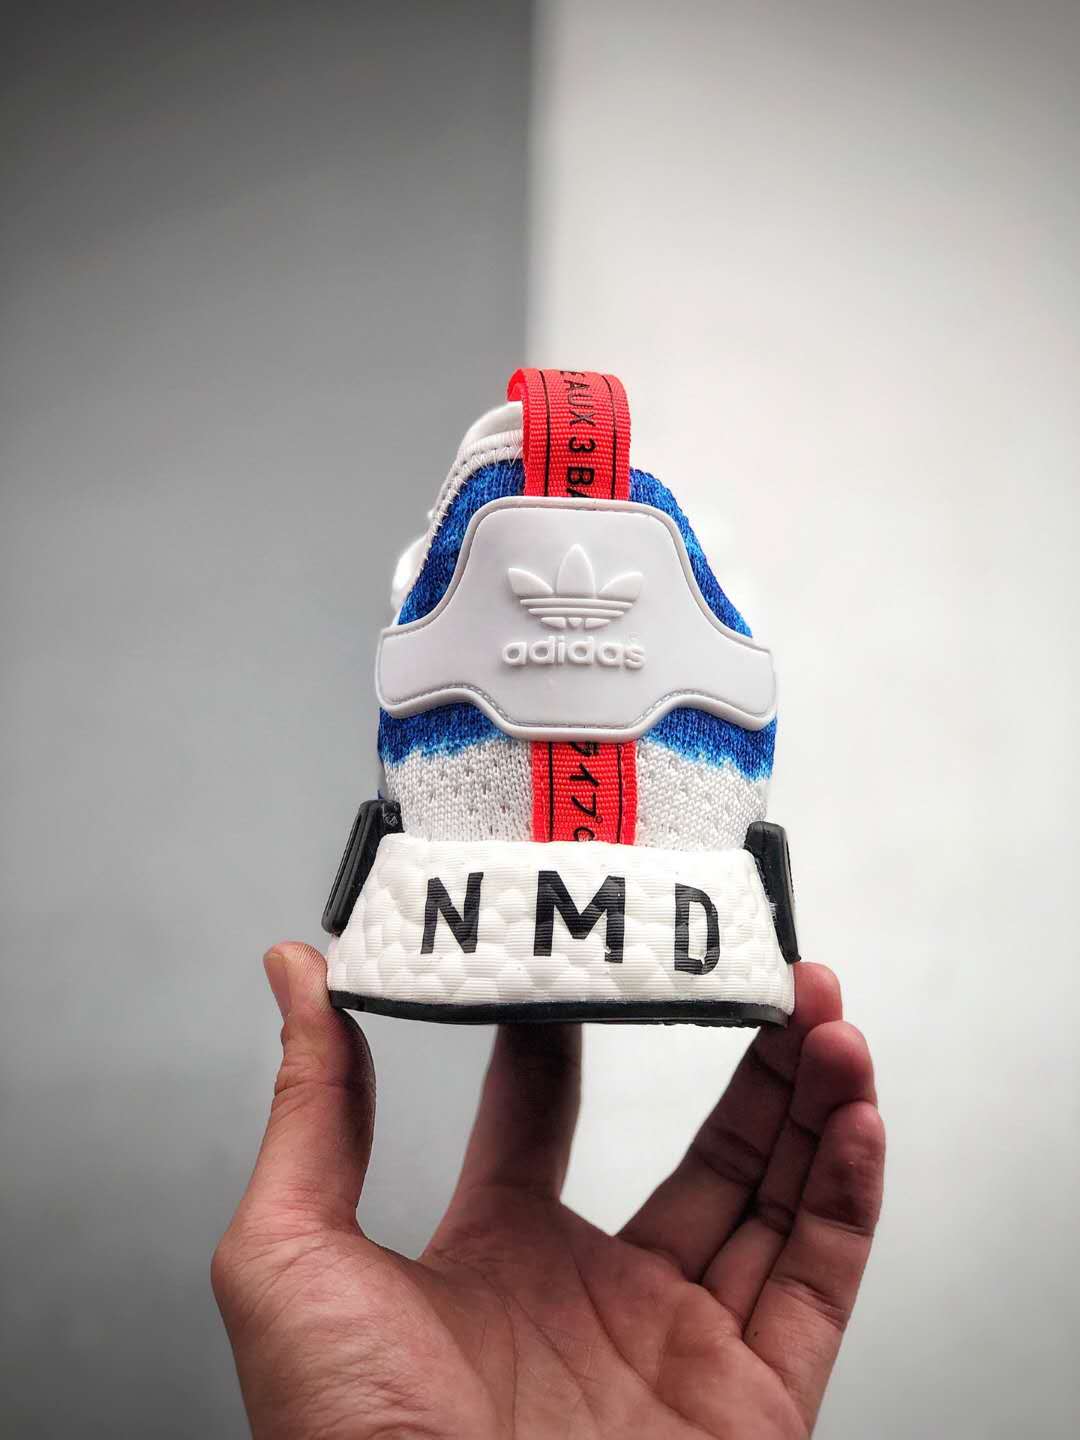 Adidas NMD_R1 'Stencil Pack - Bold Blue' G27916 - Trendy Urban Sneakers